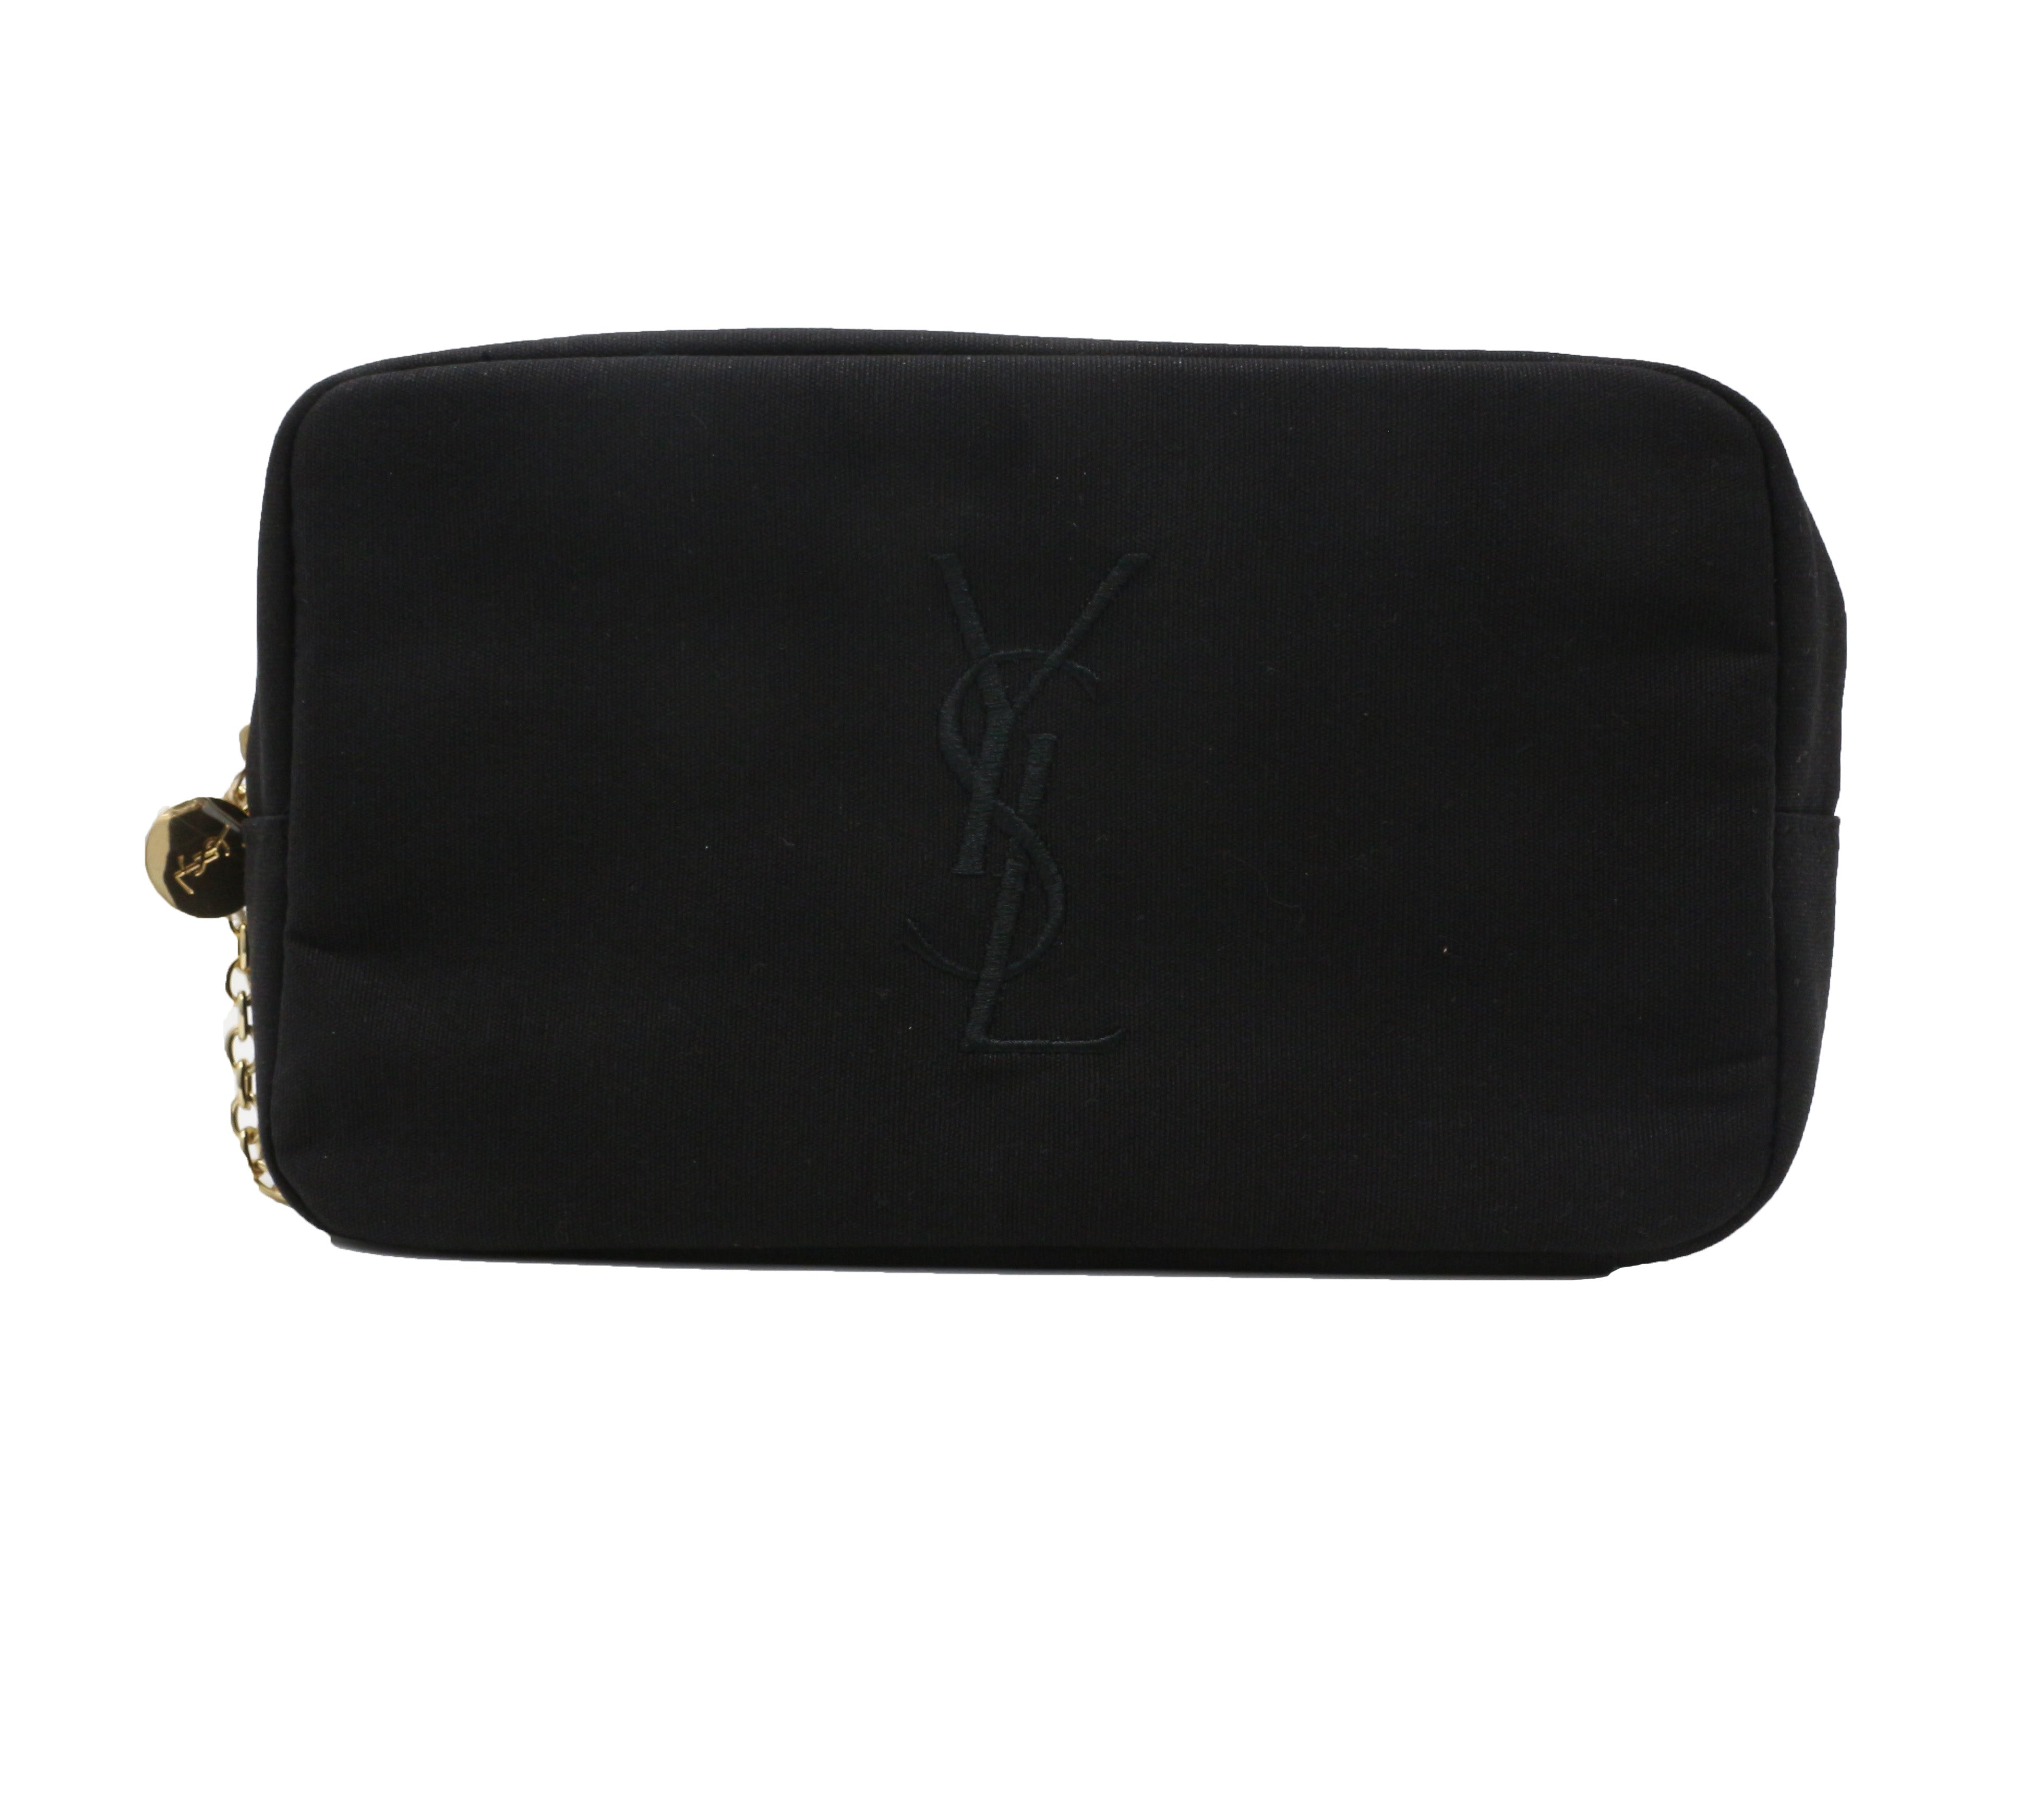 Yves Saint Laurent Pouch Makeup Cosmetic Bags